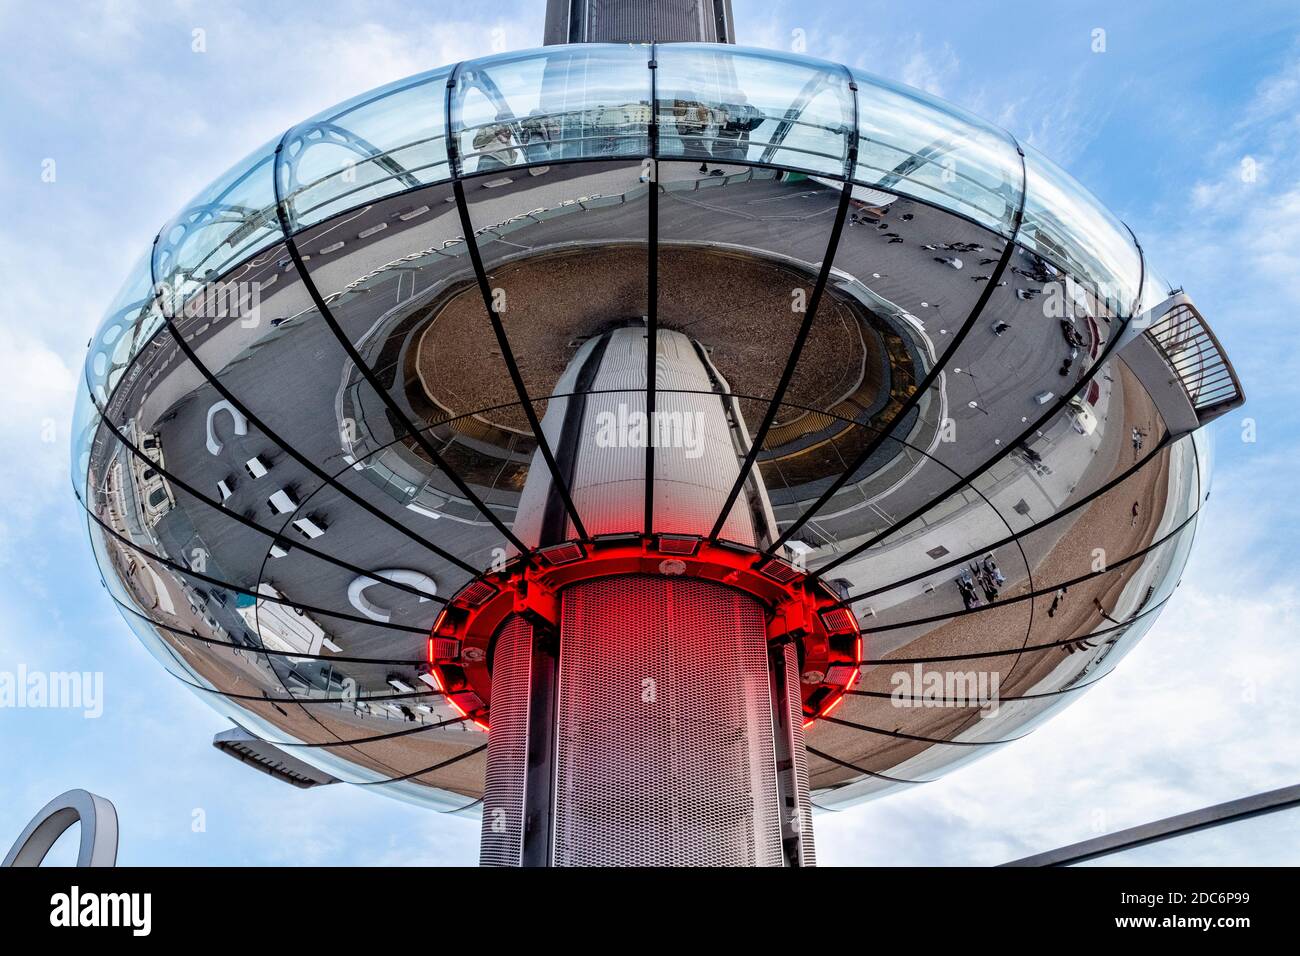 The British Airways i360 Viewing Tower, Brighton Seafront, Britain, East Sussex, UK. Foto Stock